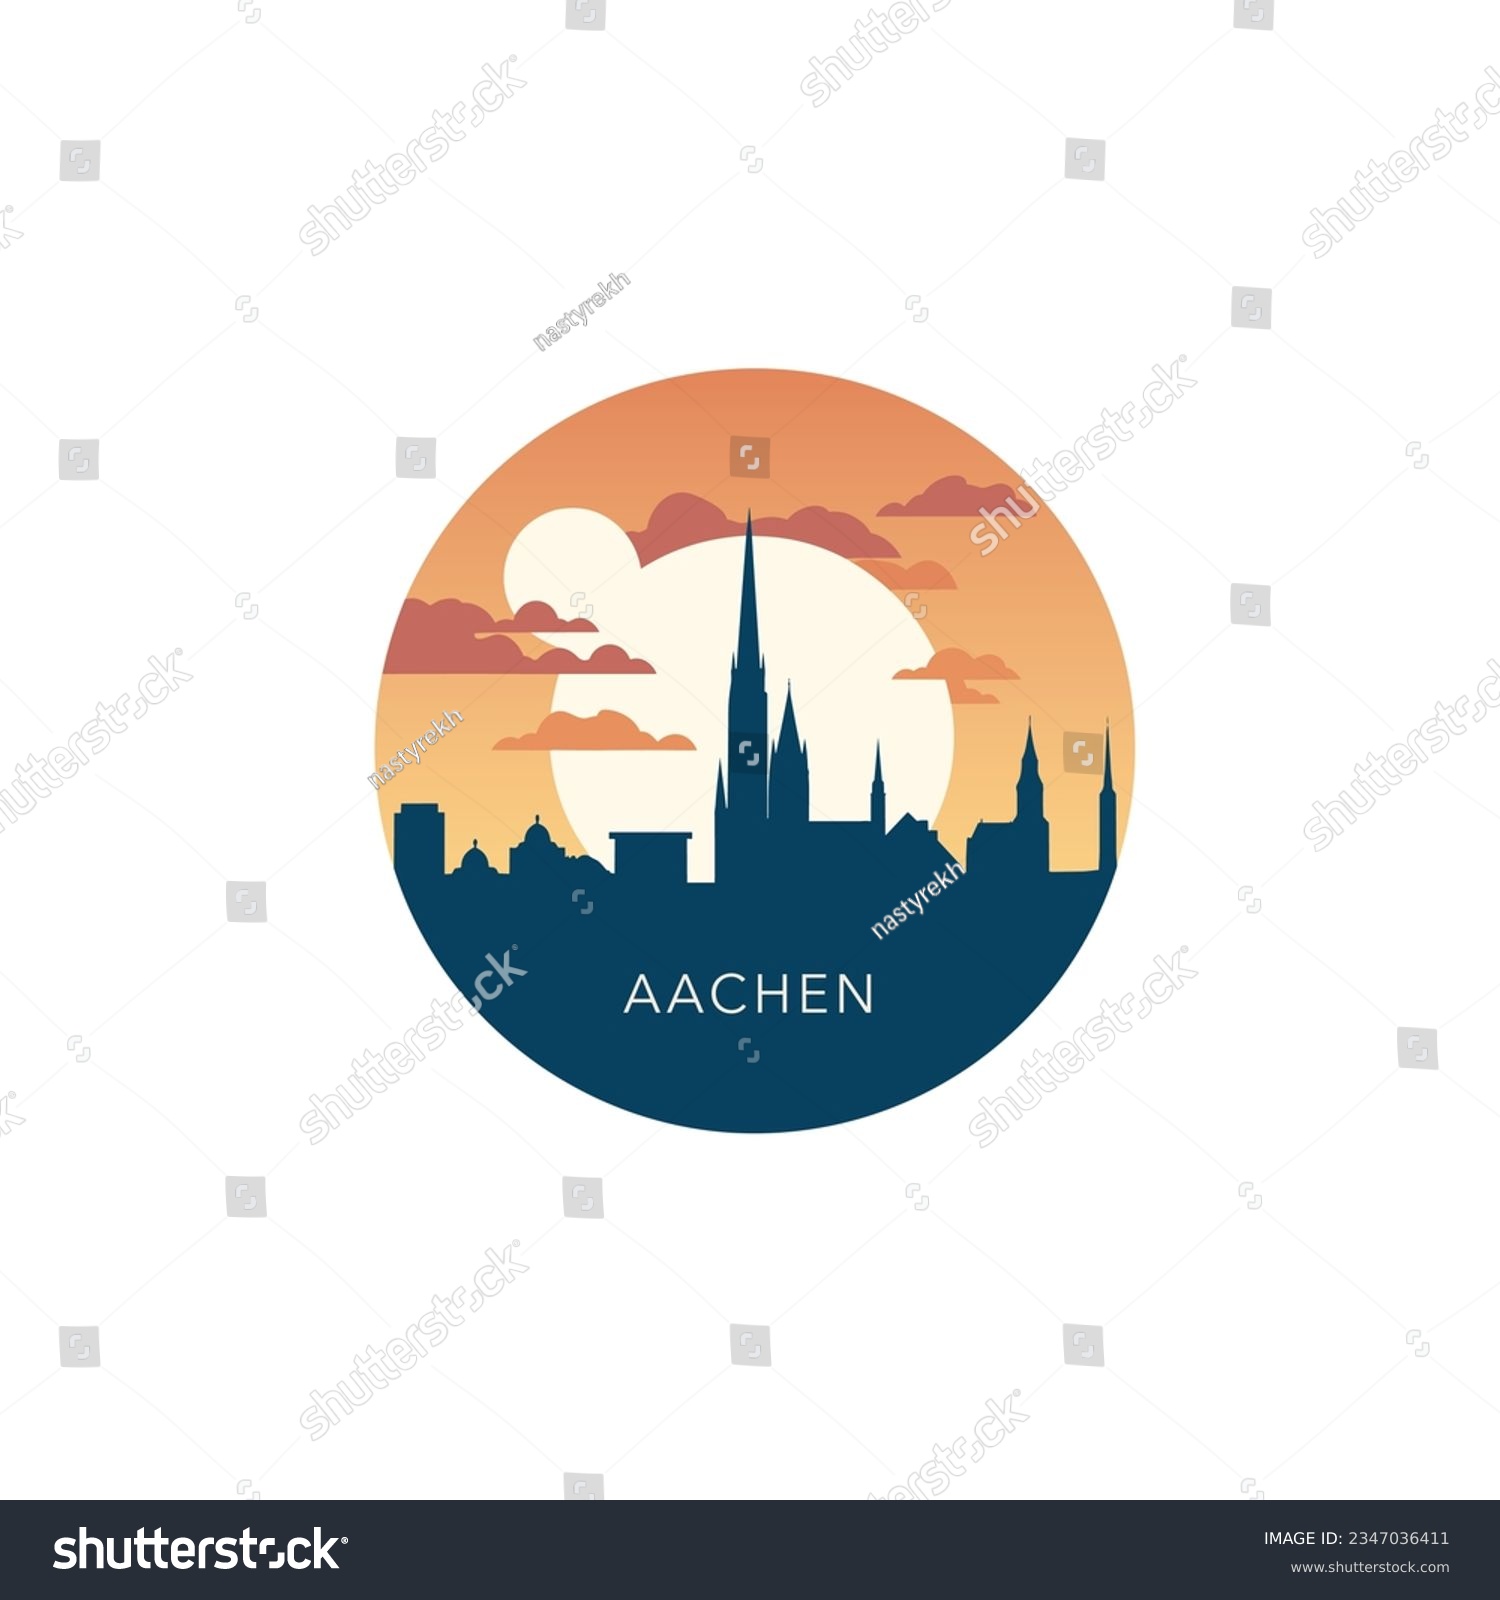 SVG of Germany Aachen cityscape skyline city panorama vector flat modern logo icon. North Rhine-Westphalia emblem idea with landmarks and building silhouettes at sunrise sunset svg